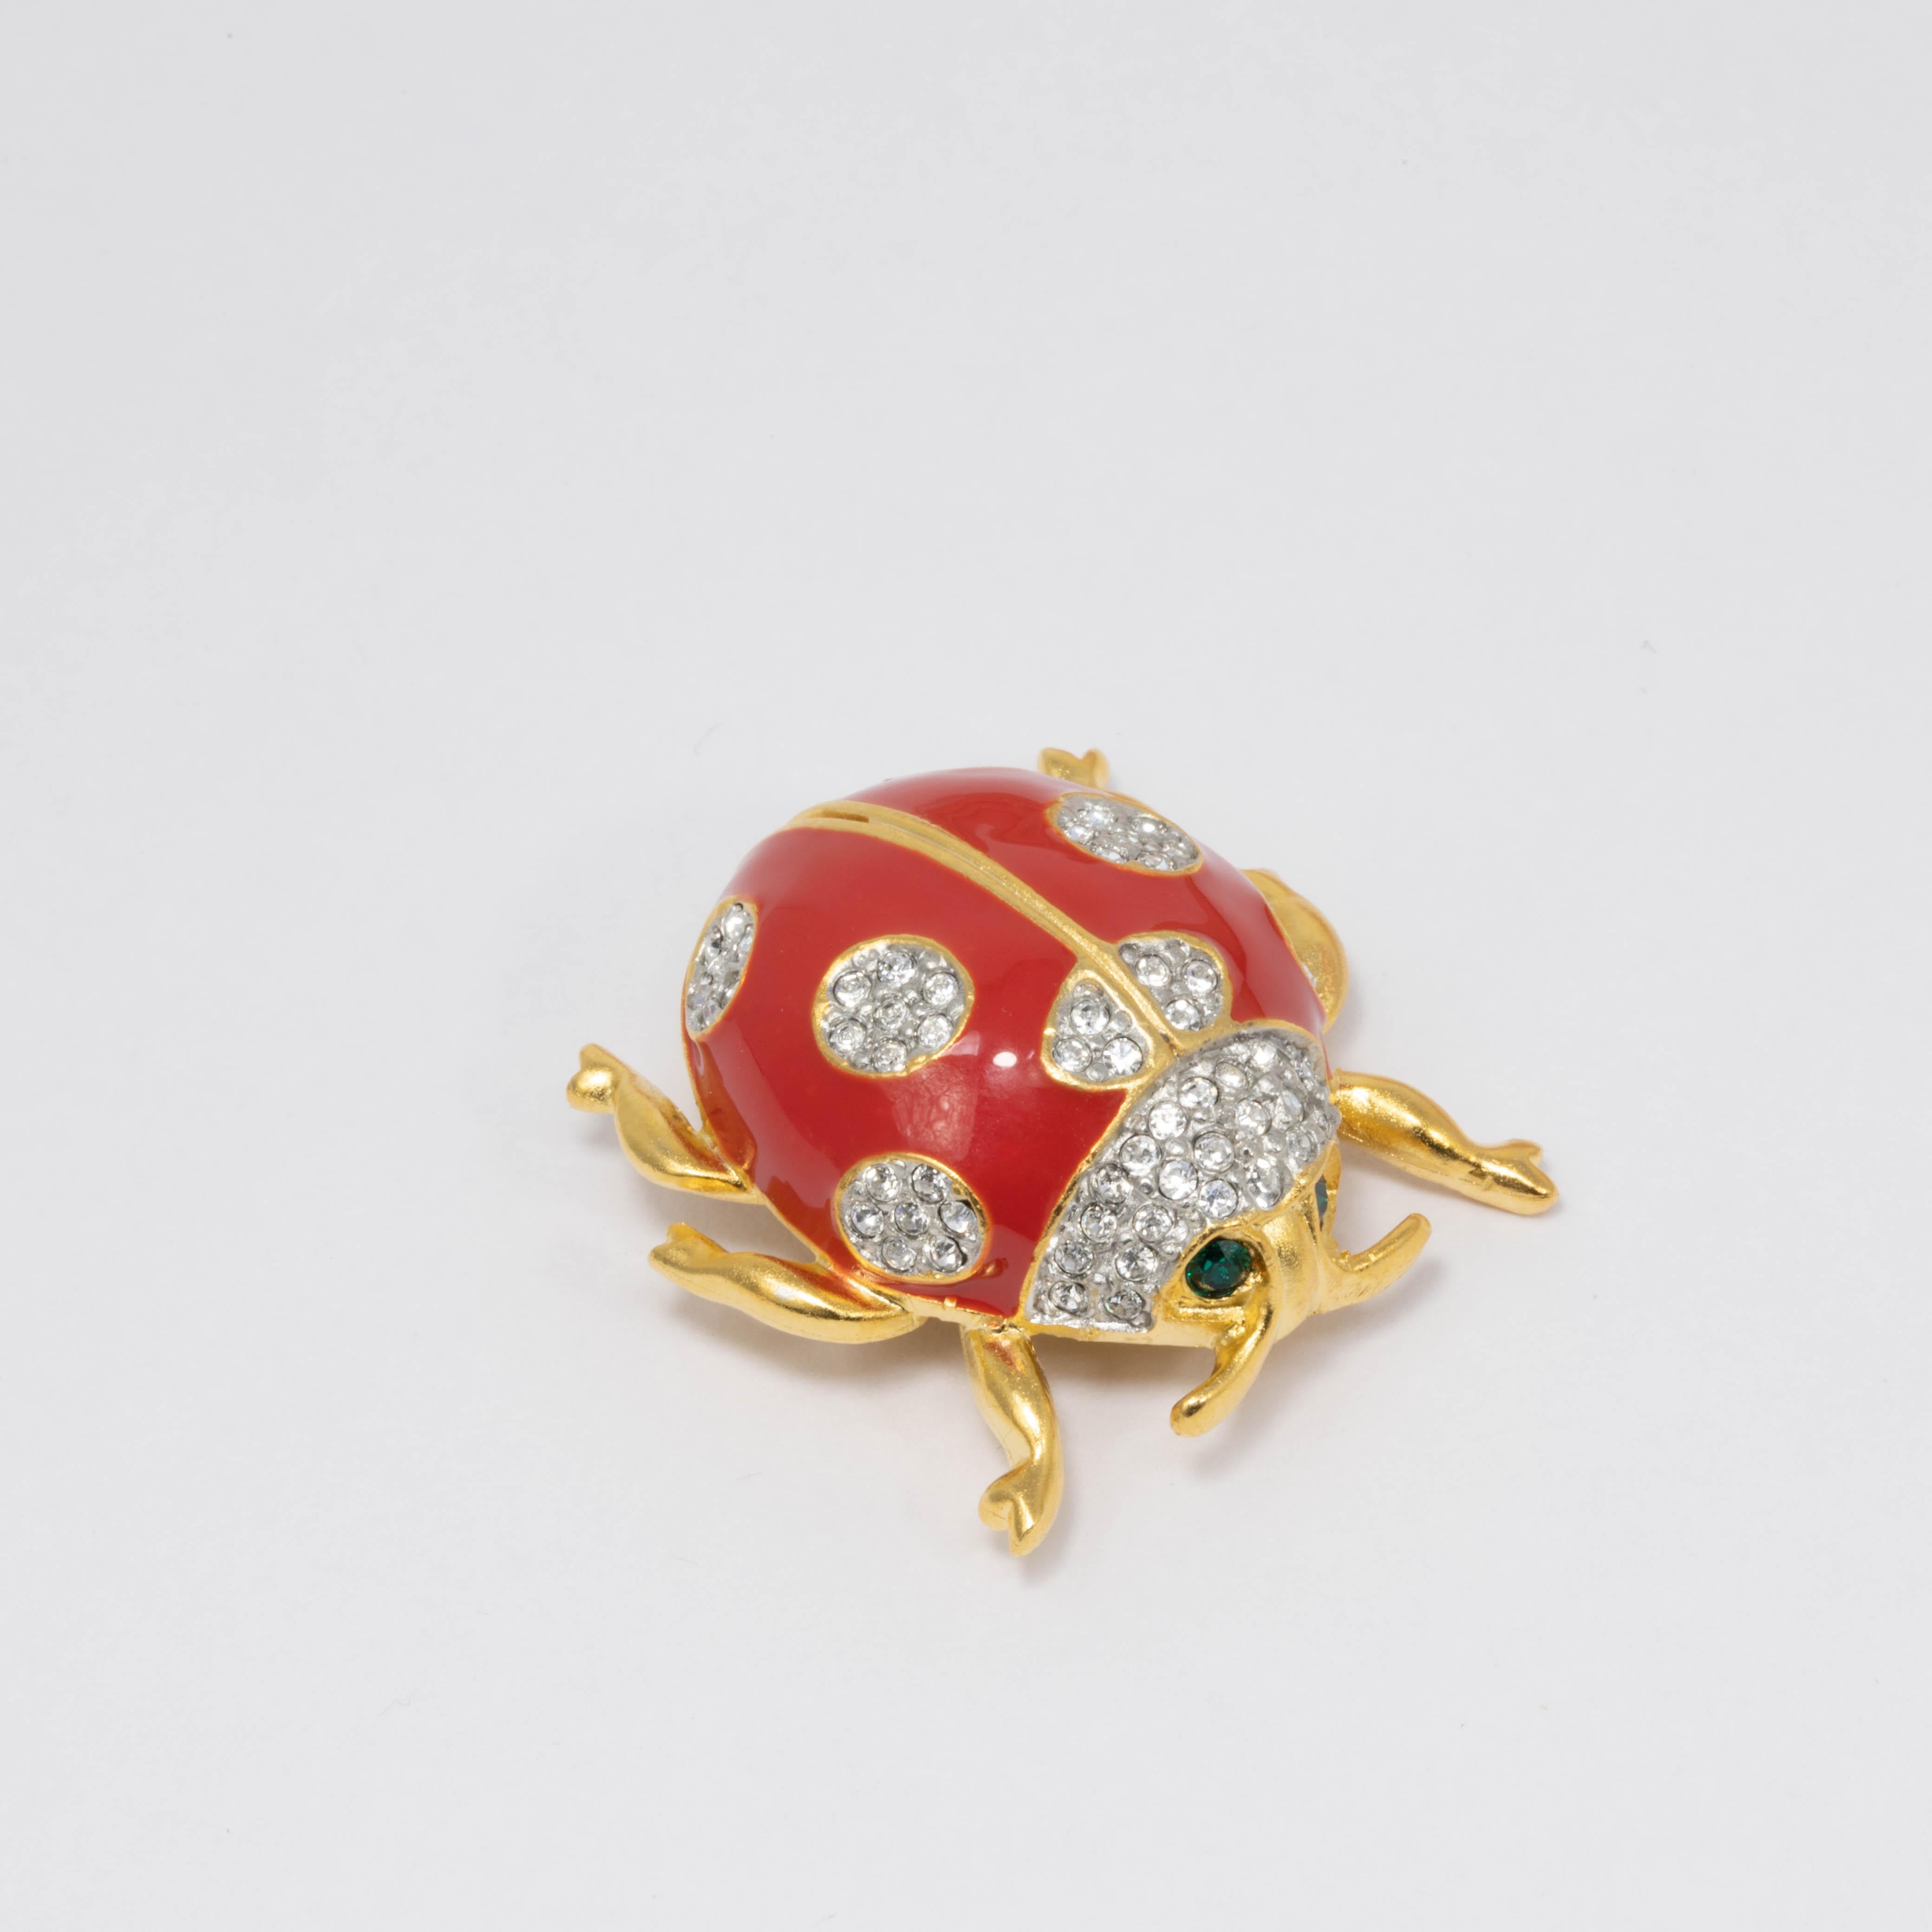 Ladybug pin brooch by Kenneth Jay Lane. This colorful critter features a golden body with crystal accents and painted red and black enamel.

Gold plated.

Tags, Marks, Hallmarks: Kenneth © Lane, Made in USA